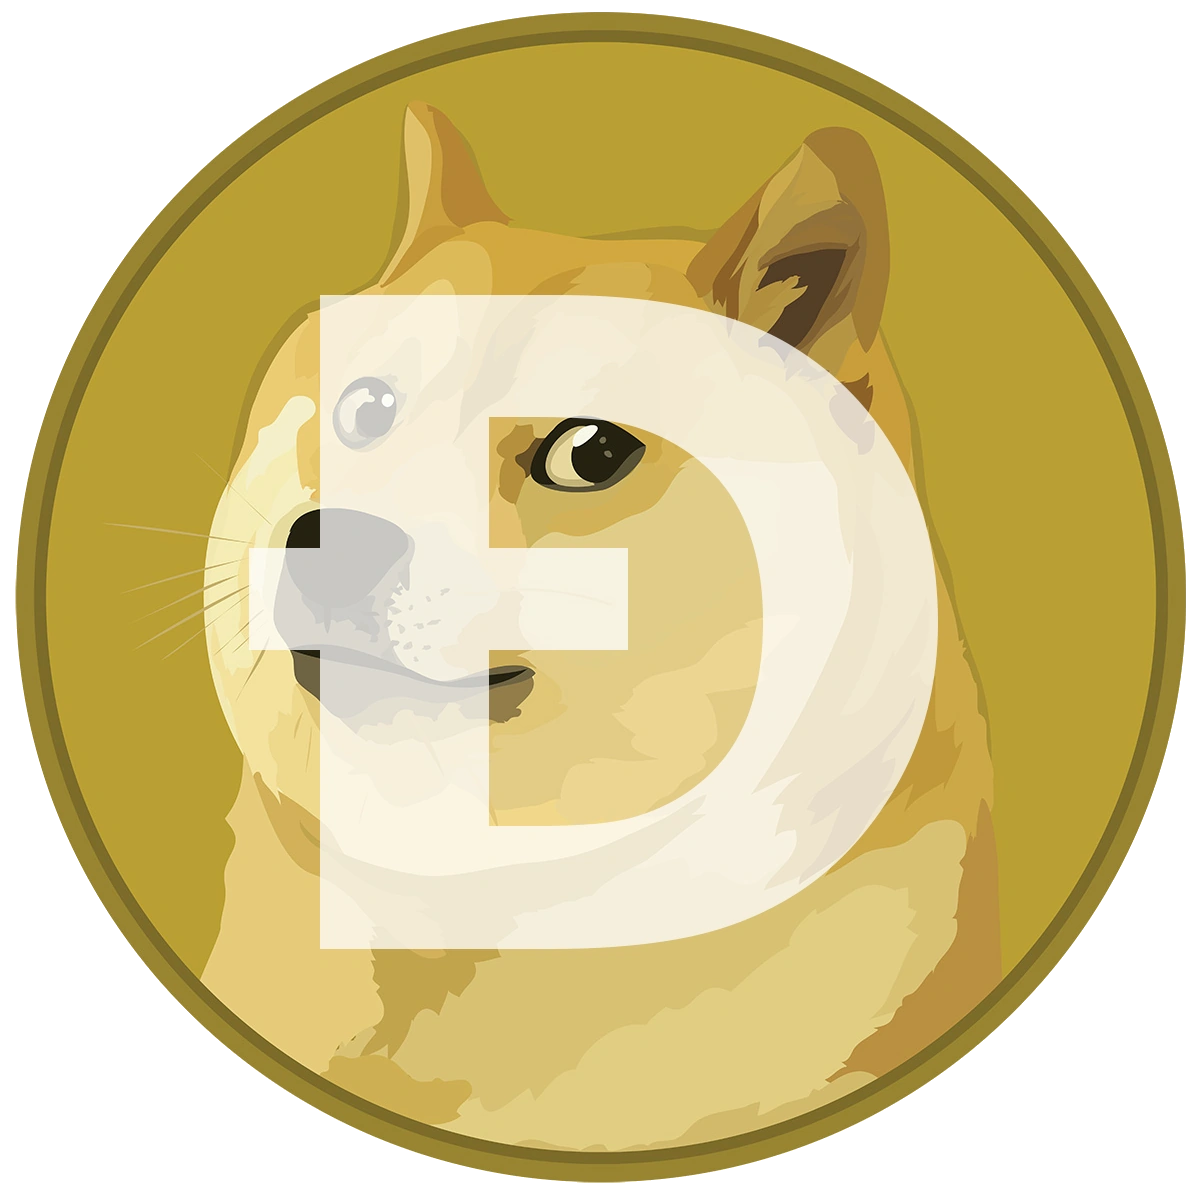 dogecoin doge logo Dogecoin Ranks #2 As Dogecoin Foundation Allocates 5 Million DOGE To Primary Development Fund - Top 3 Coins To Watch From Jan 9th - Jan 15th CoinCheckup Blog